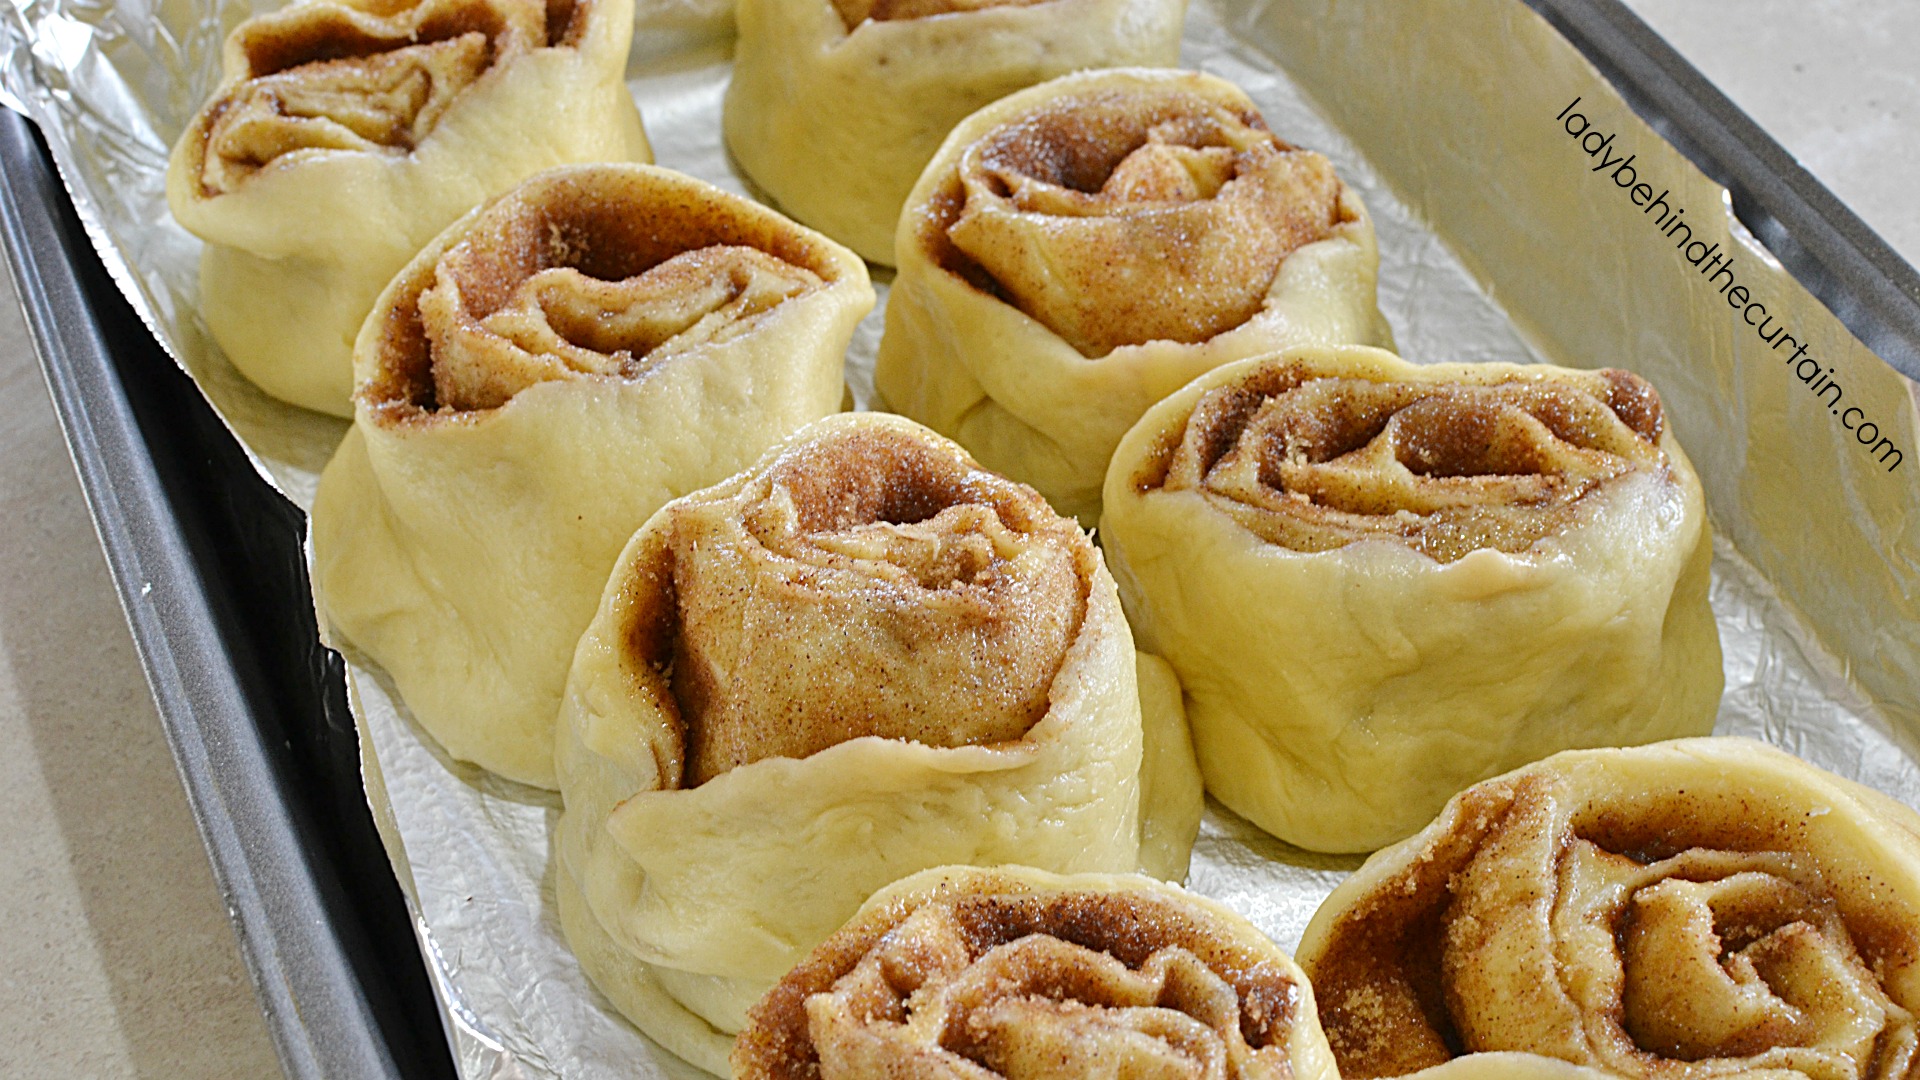 Giant Cinnamon Rolls | I make these cinnamon rolls every Christmas morning and for birthdays! These nice large rolls are not too sweet and are perfect for those rainy mornings.